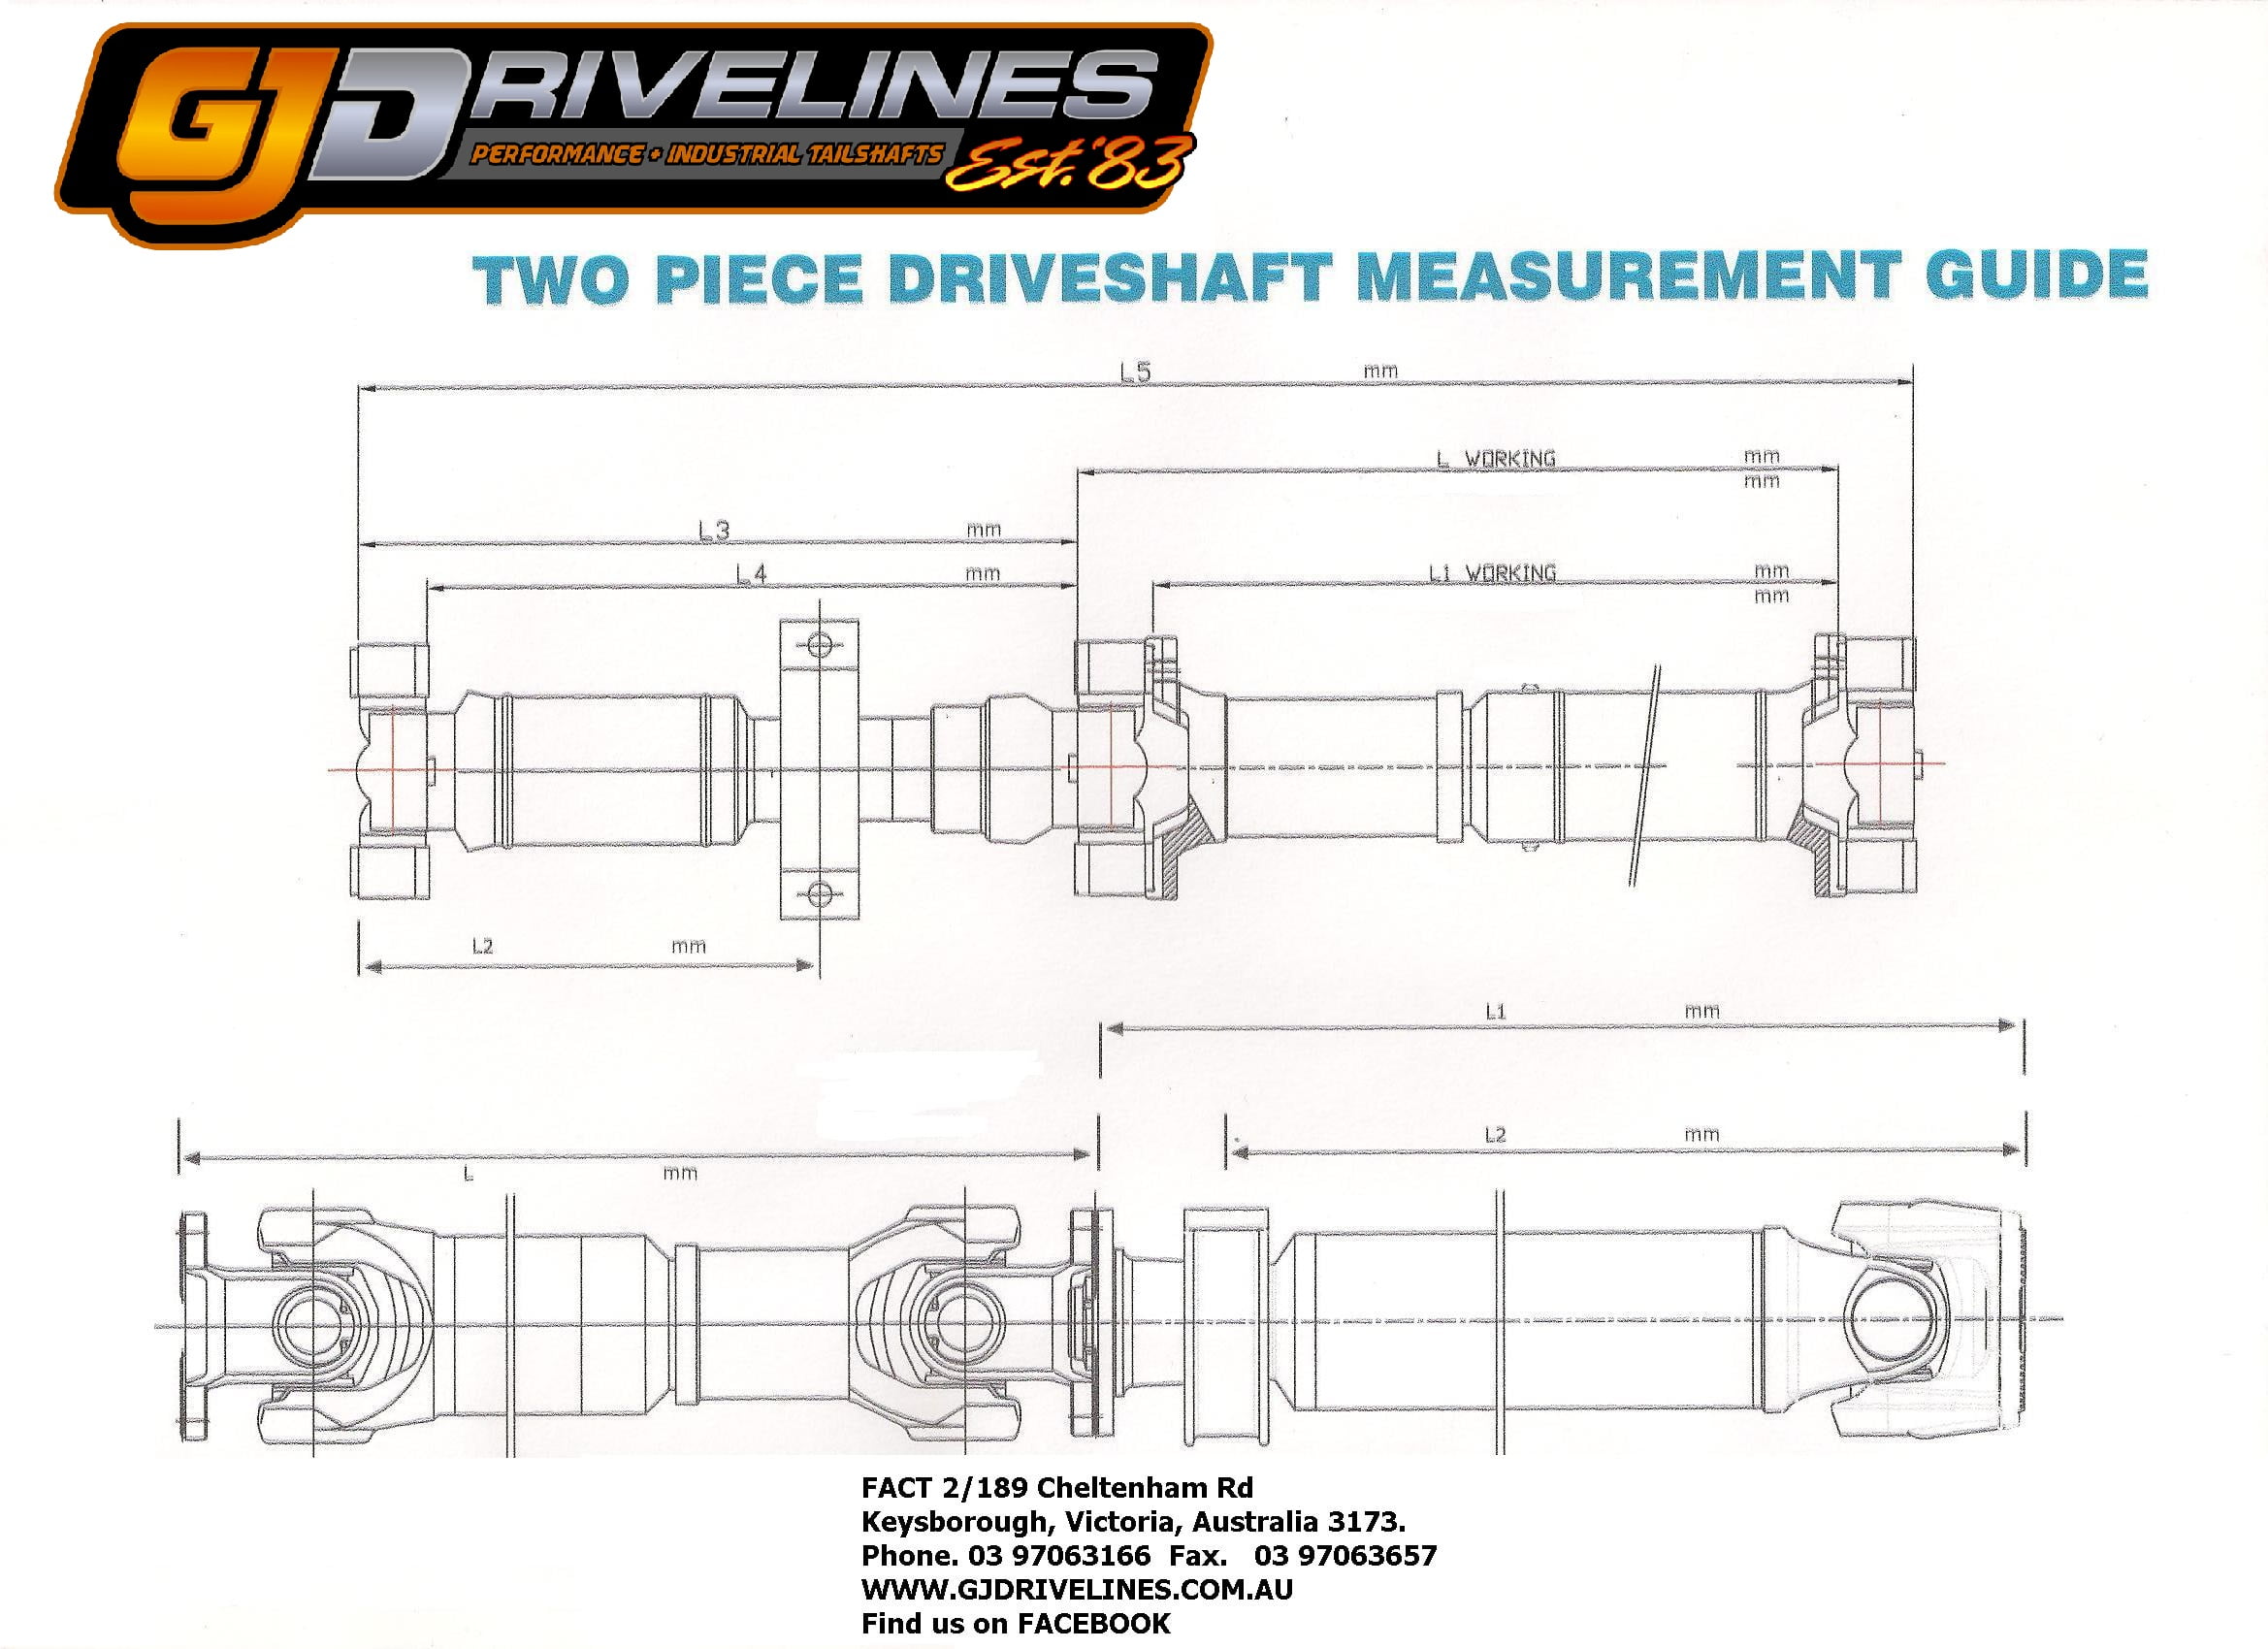 TWO PIECE DRIVESHAFT MEASUREMENT GUIDE